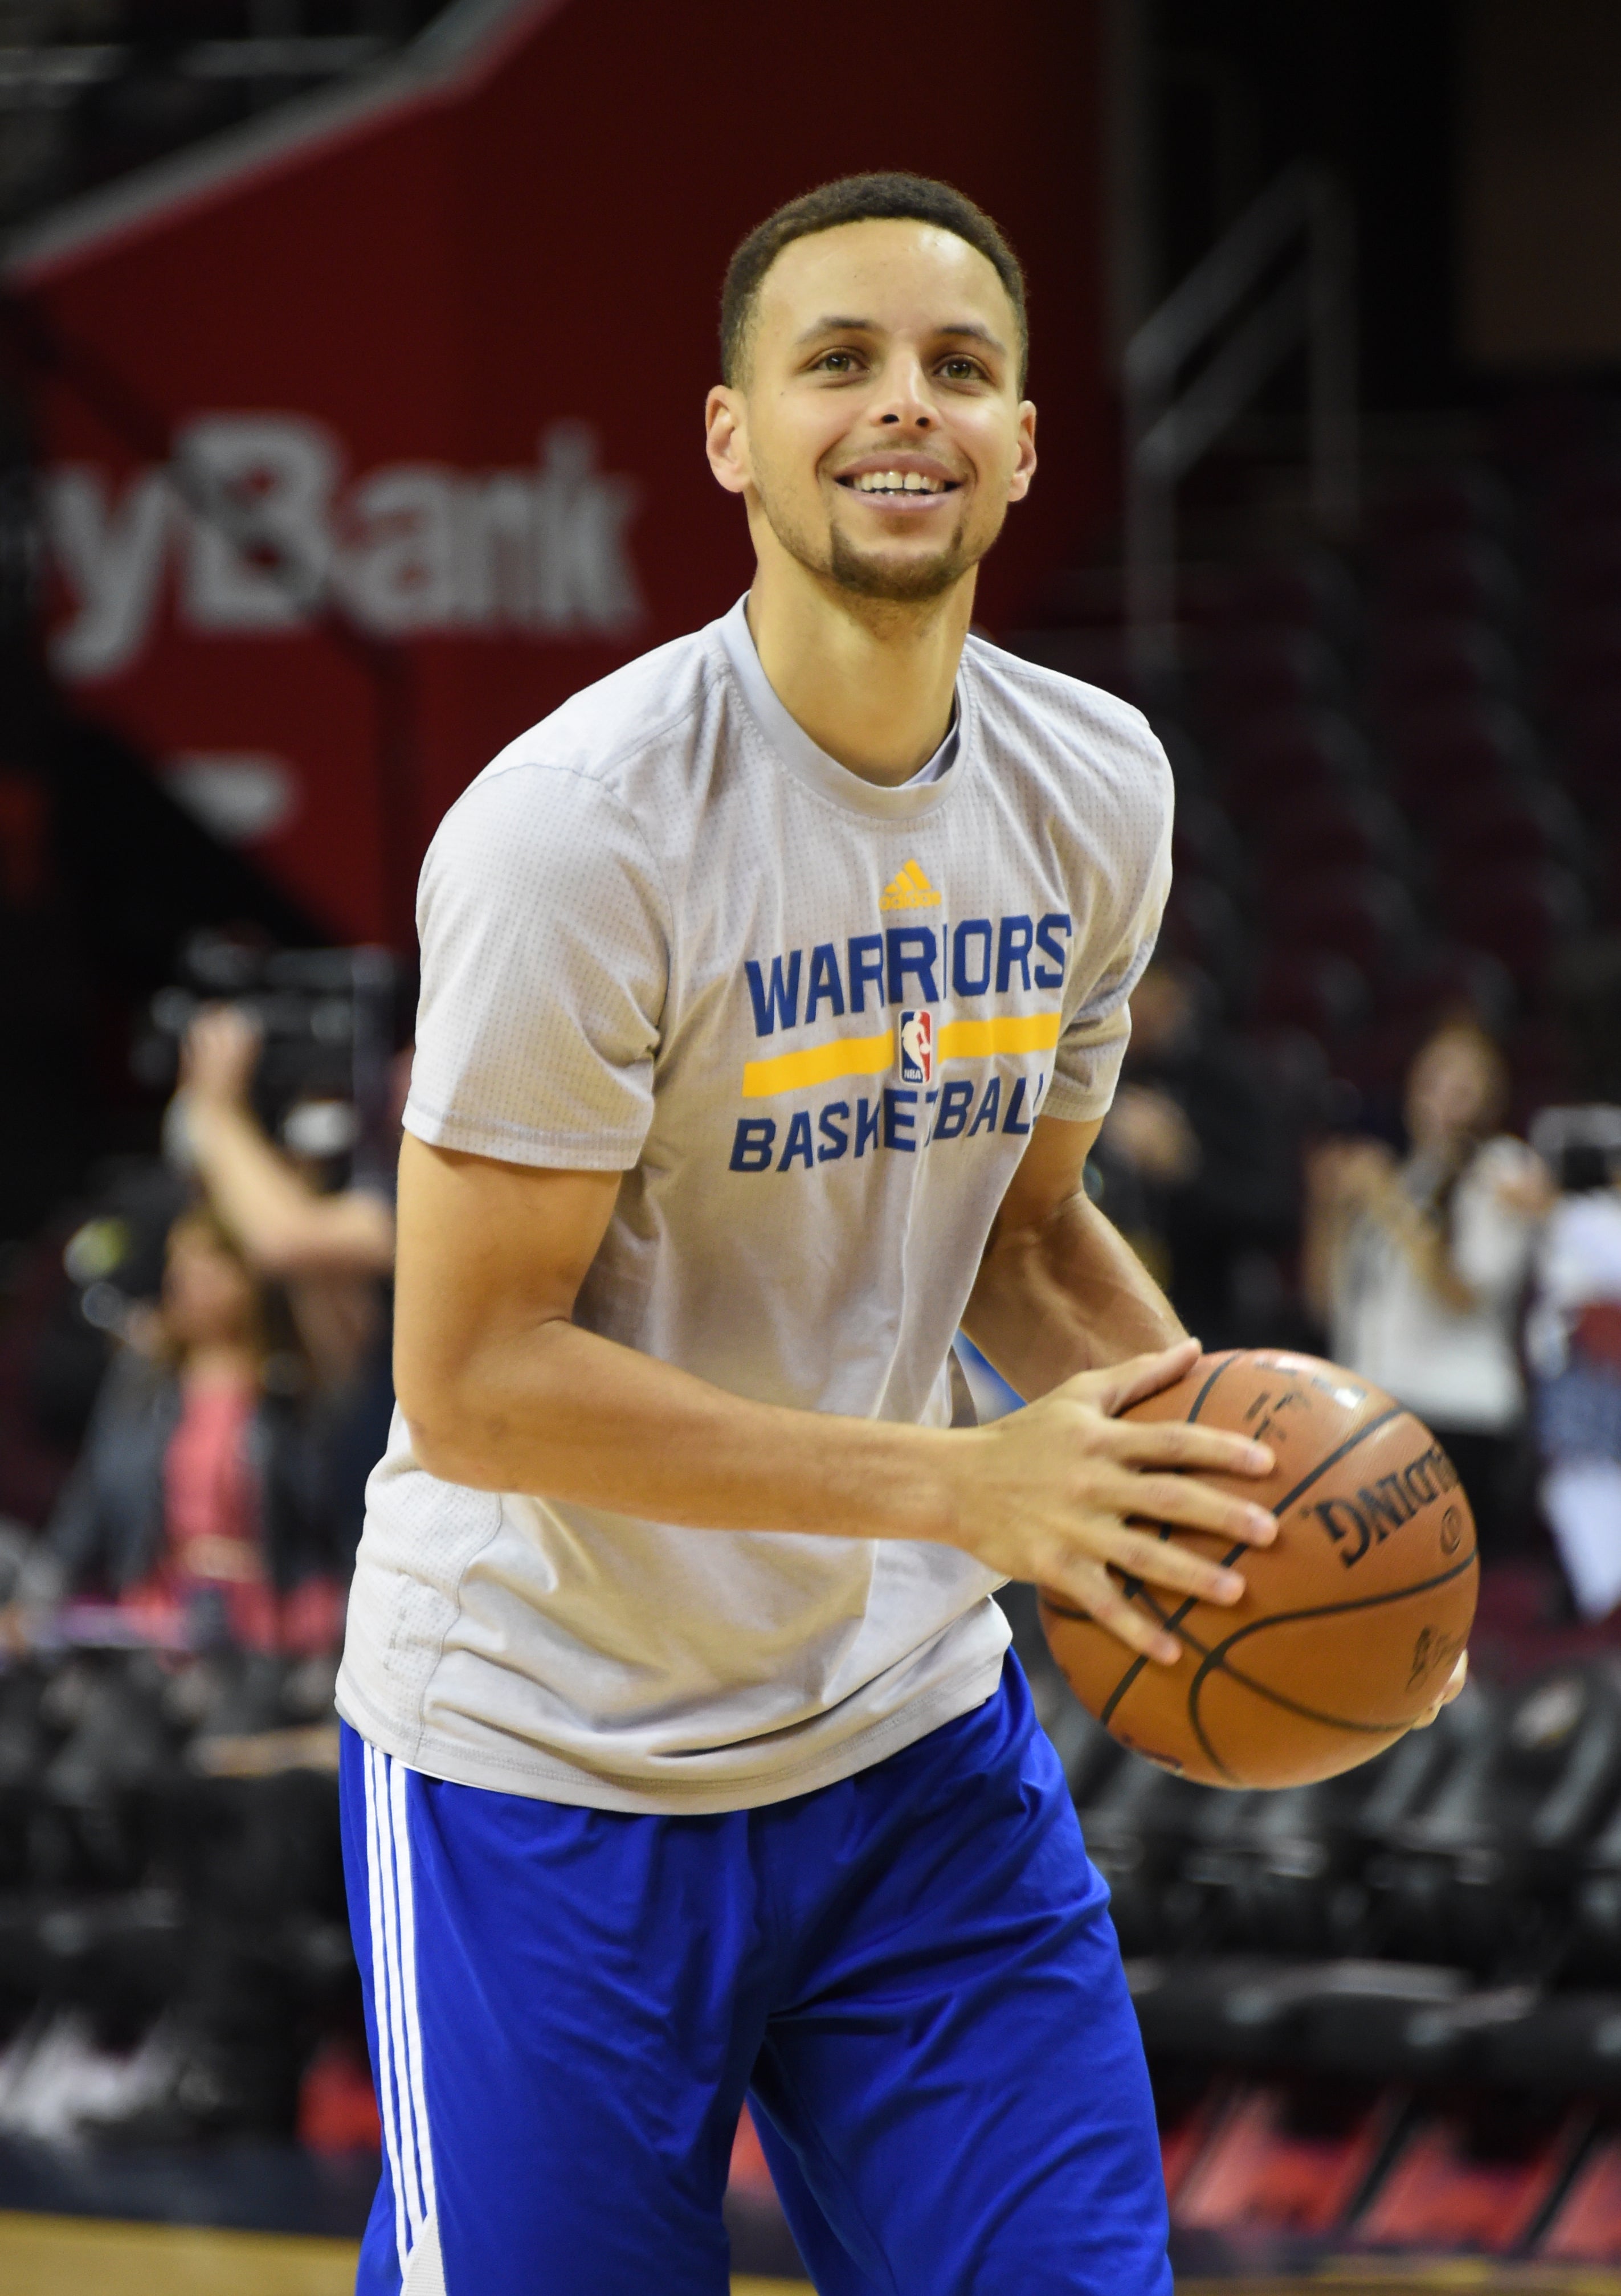 Twitter Rips Steph Curry's New Sneakers Apart
